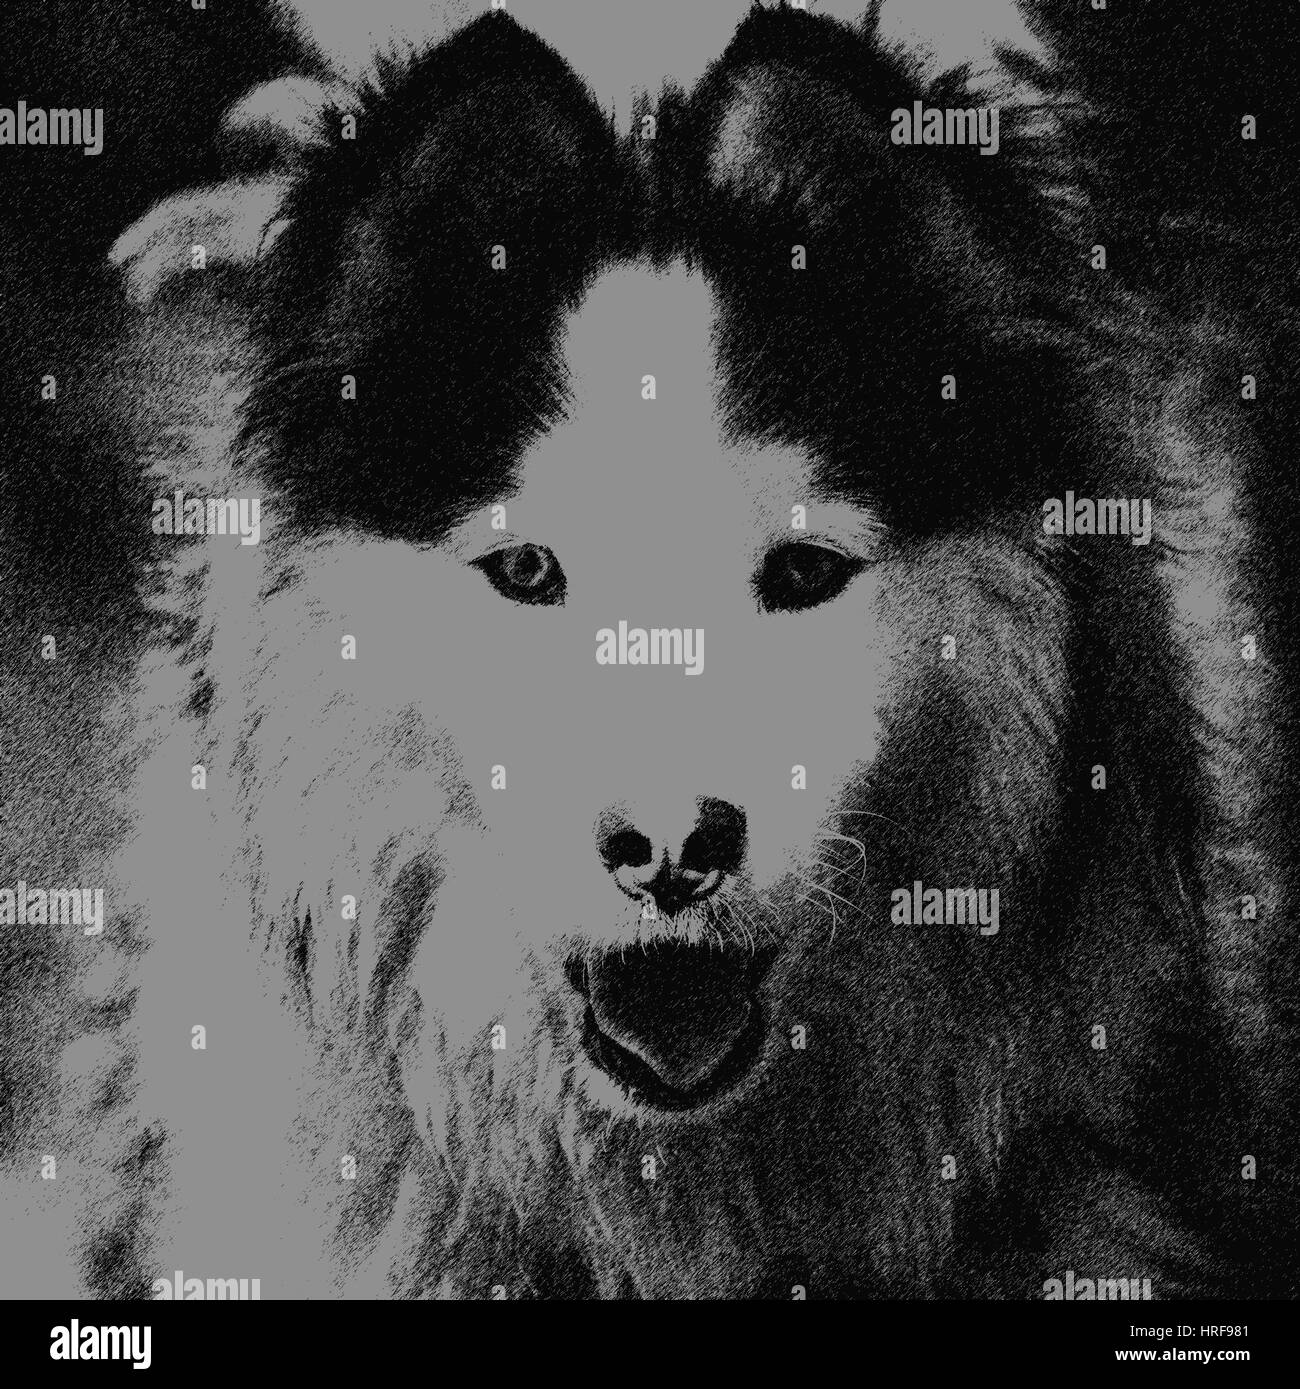 abstract sketch black and white malamute dog portrait Stock Photo